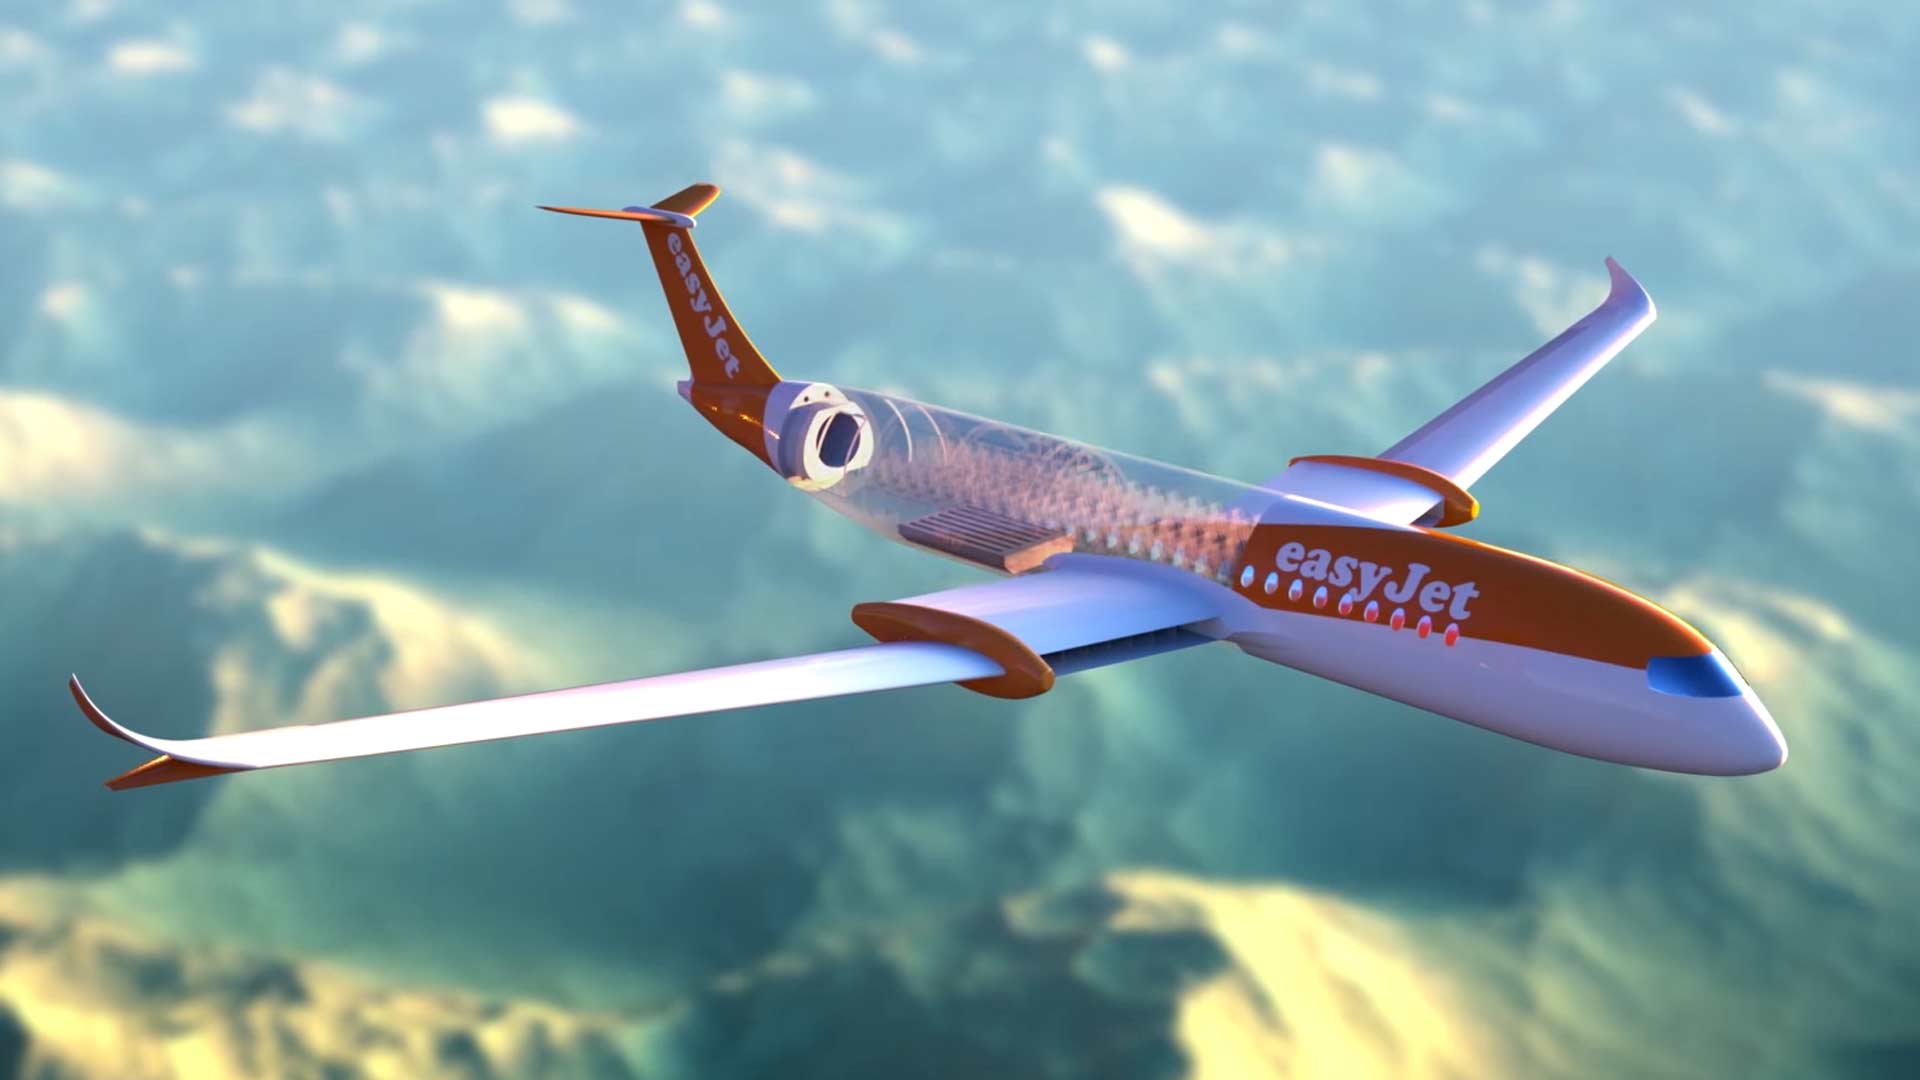 EasyJet to fly battery-powered planes within the next decade - Diorama